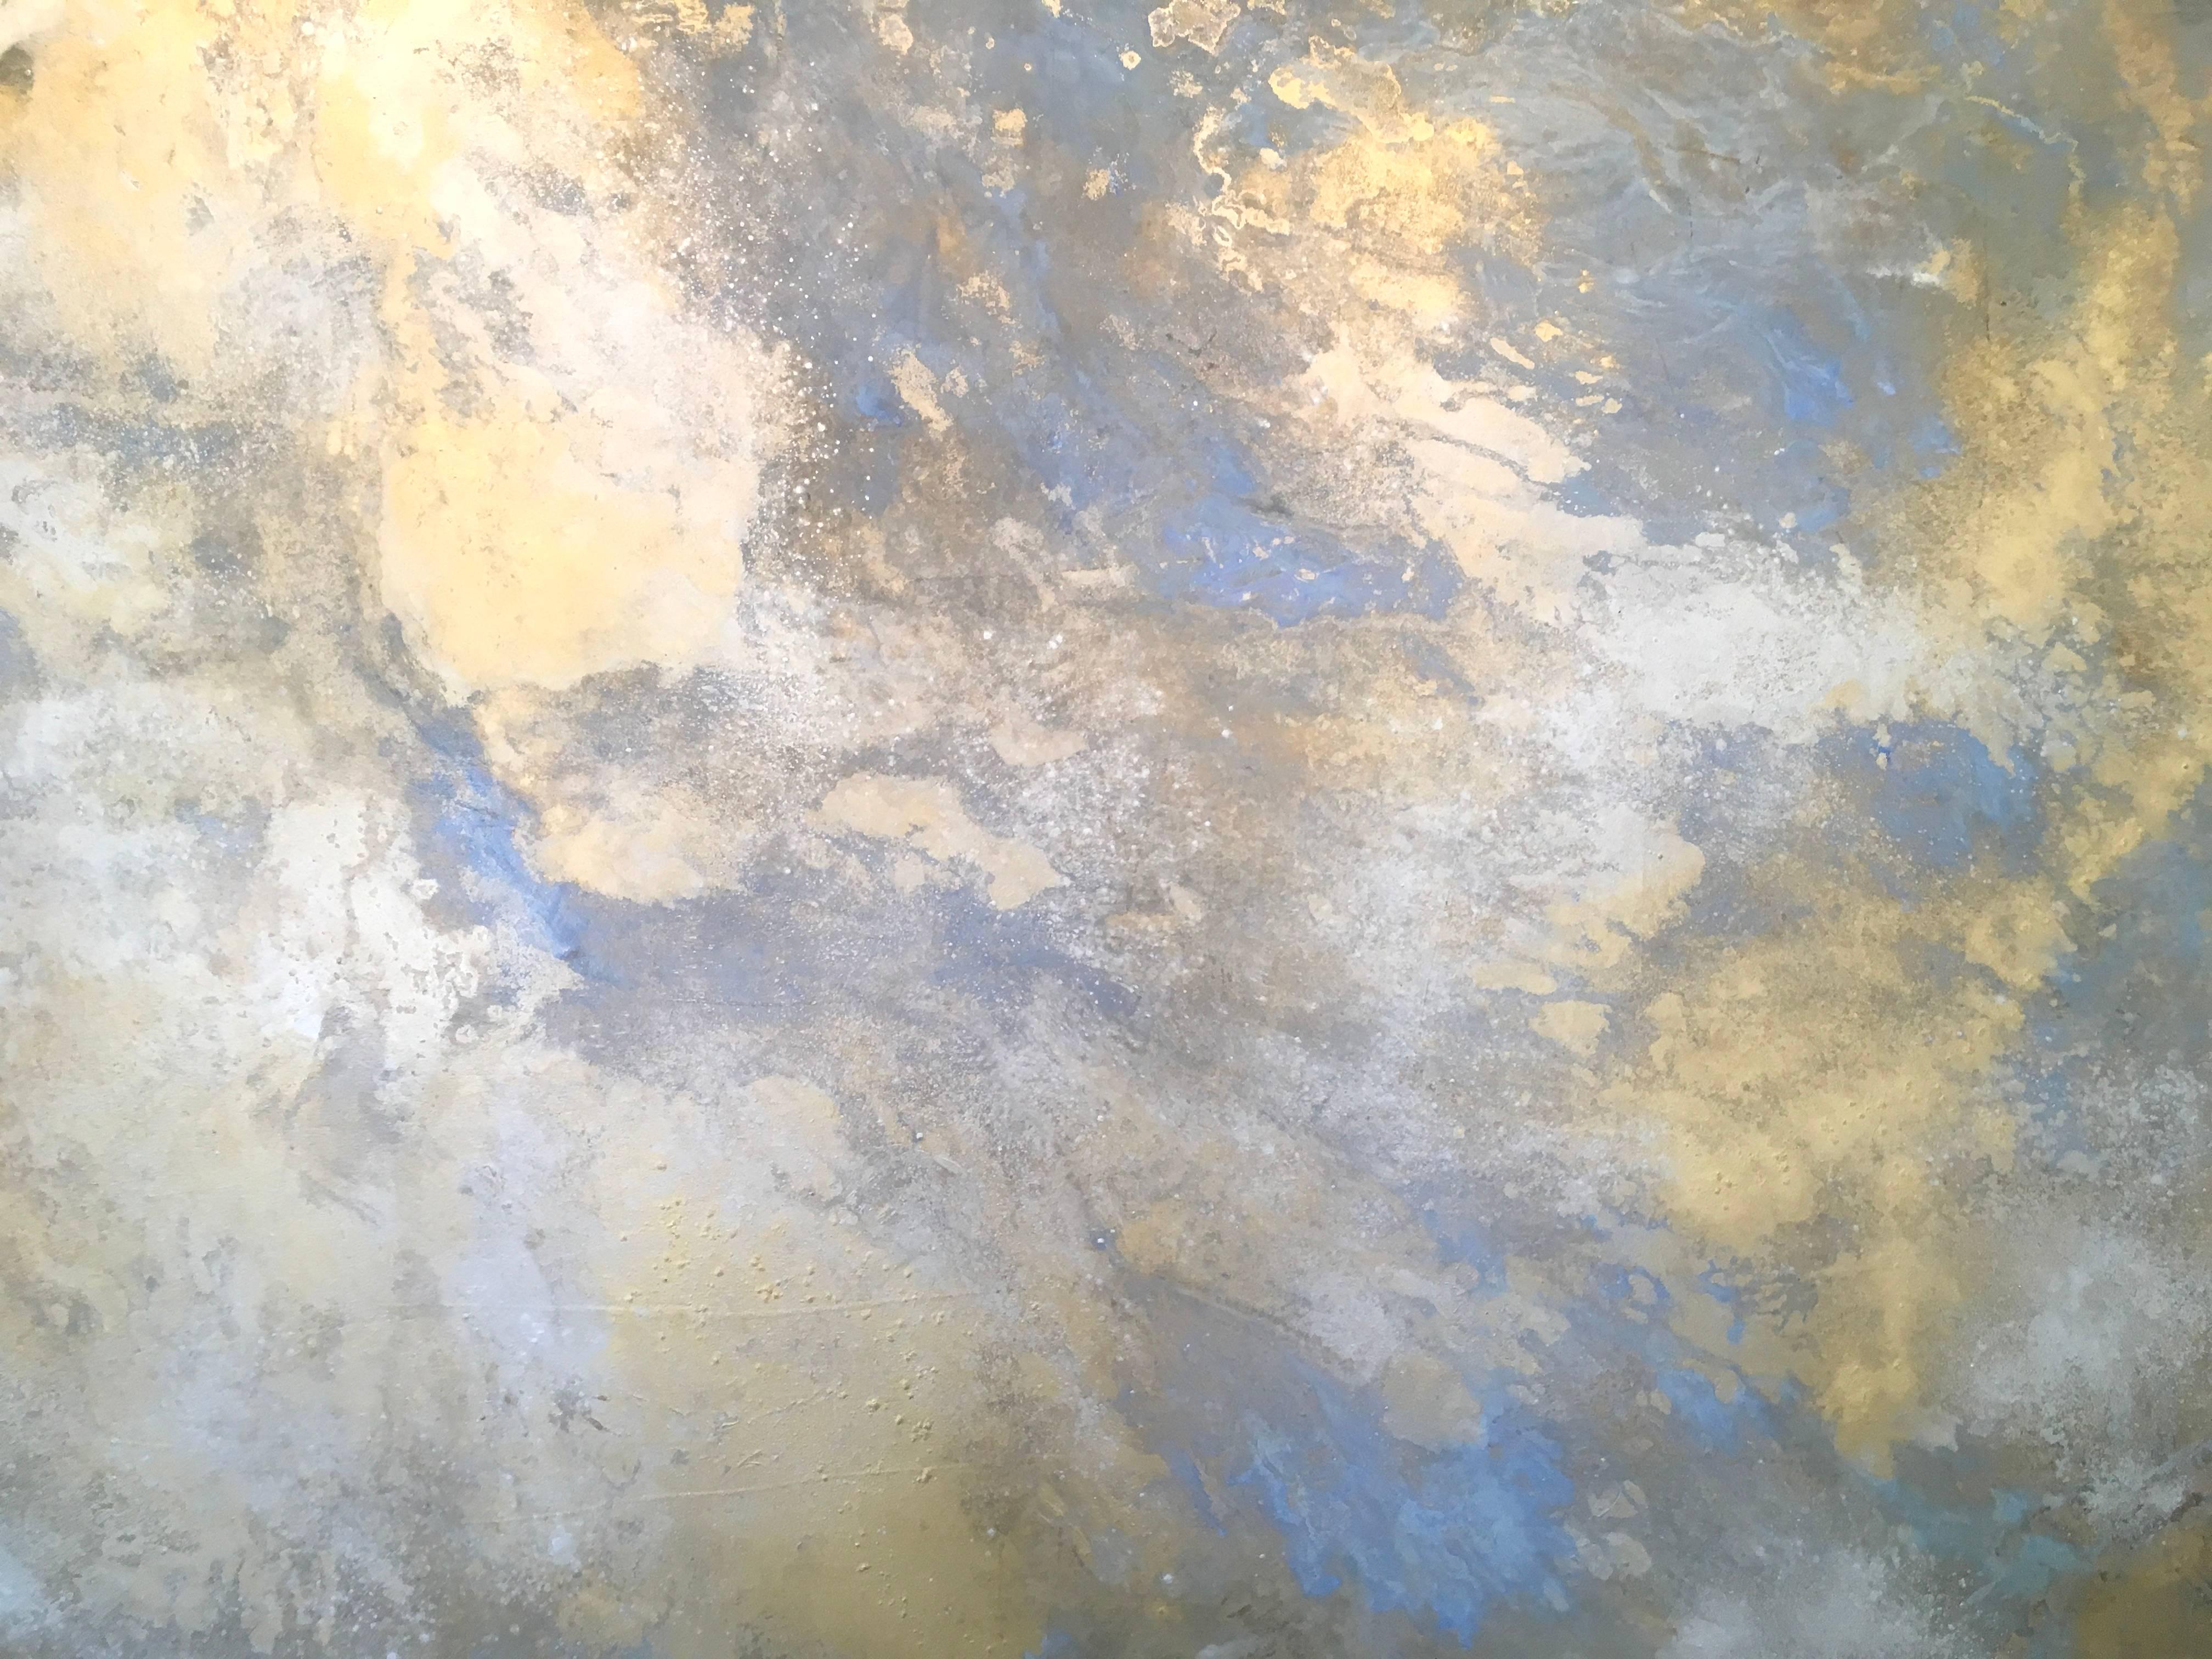 Michelle Gagliano, Rhosen, Oil and Oil Glazes and Gold Leaf on Wood Panel, 48x48.  Rhosen is inspired by the Sun coming out after a rainstorm.  It conveys a strong sense of beauty and optimism.  As you move around the artwork, the light changes as